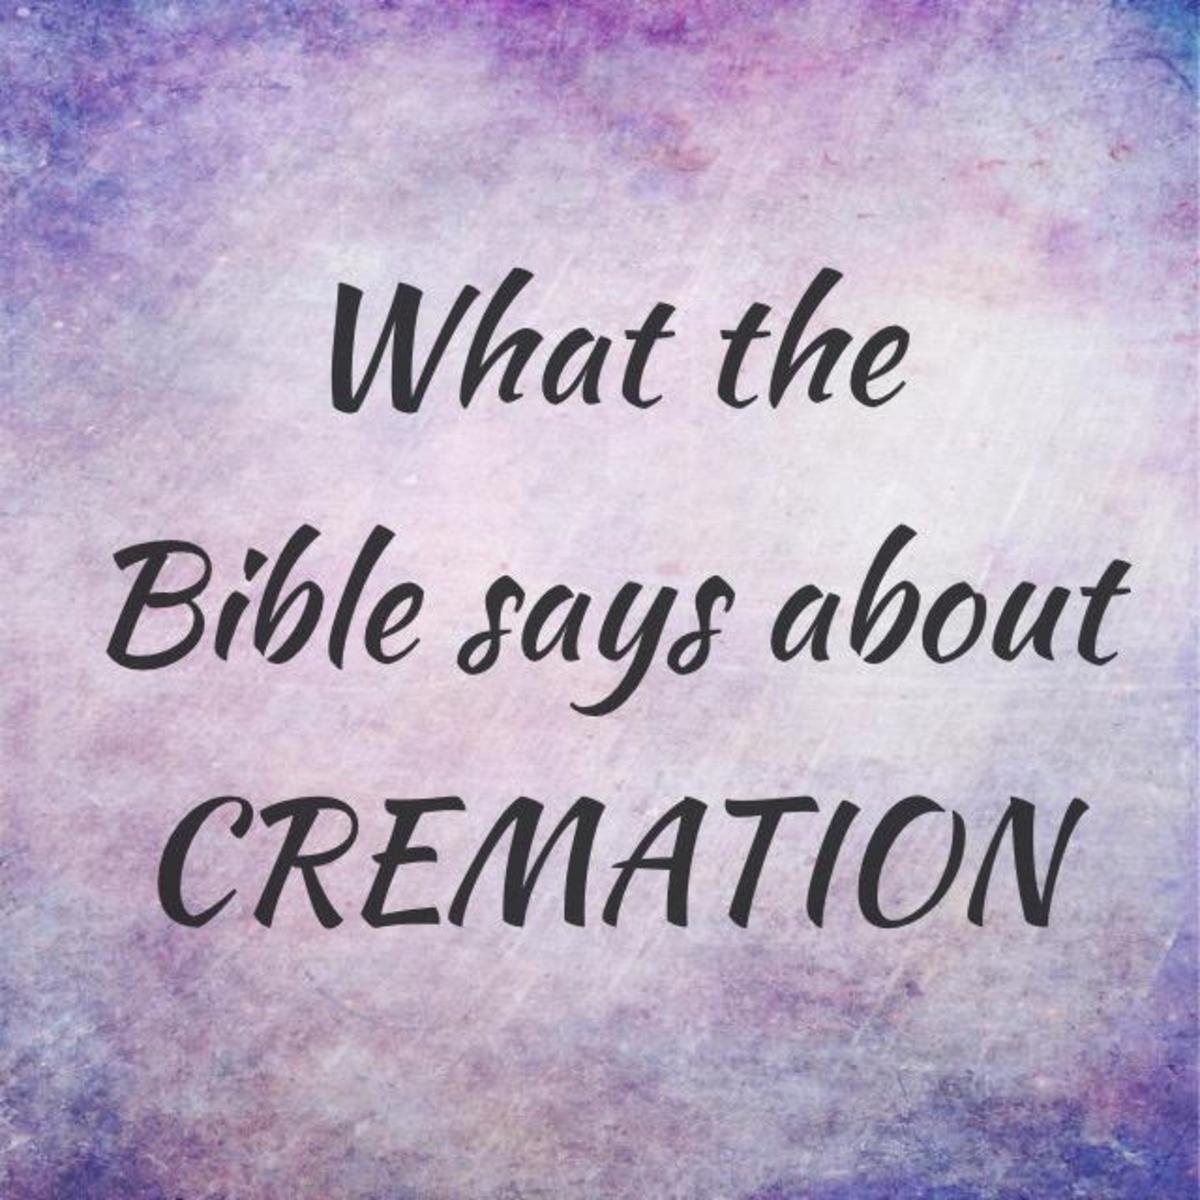 what-the-bible-says-about-cremation